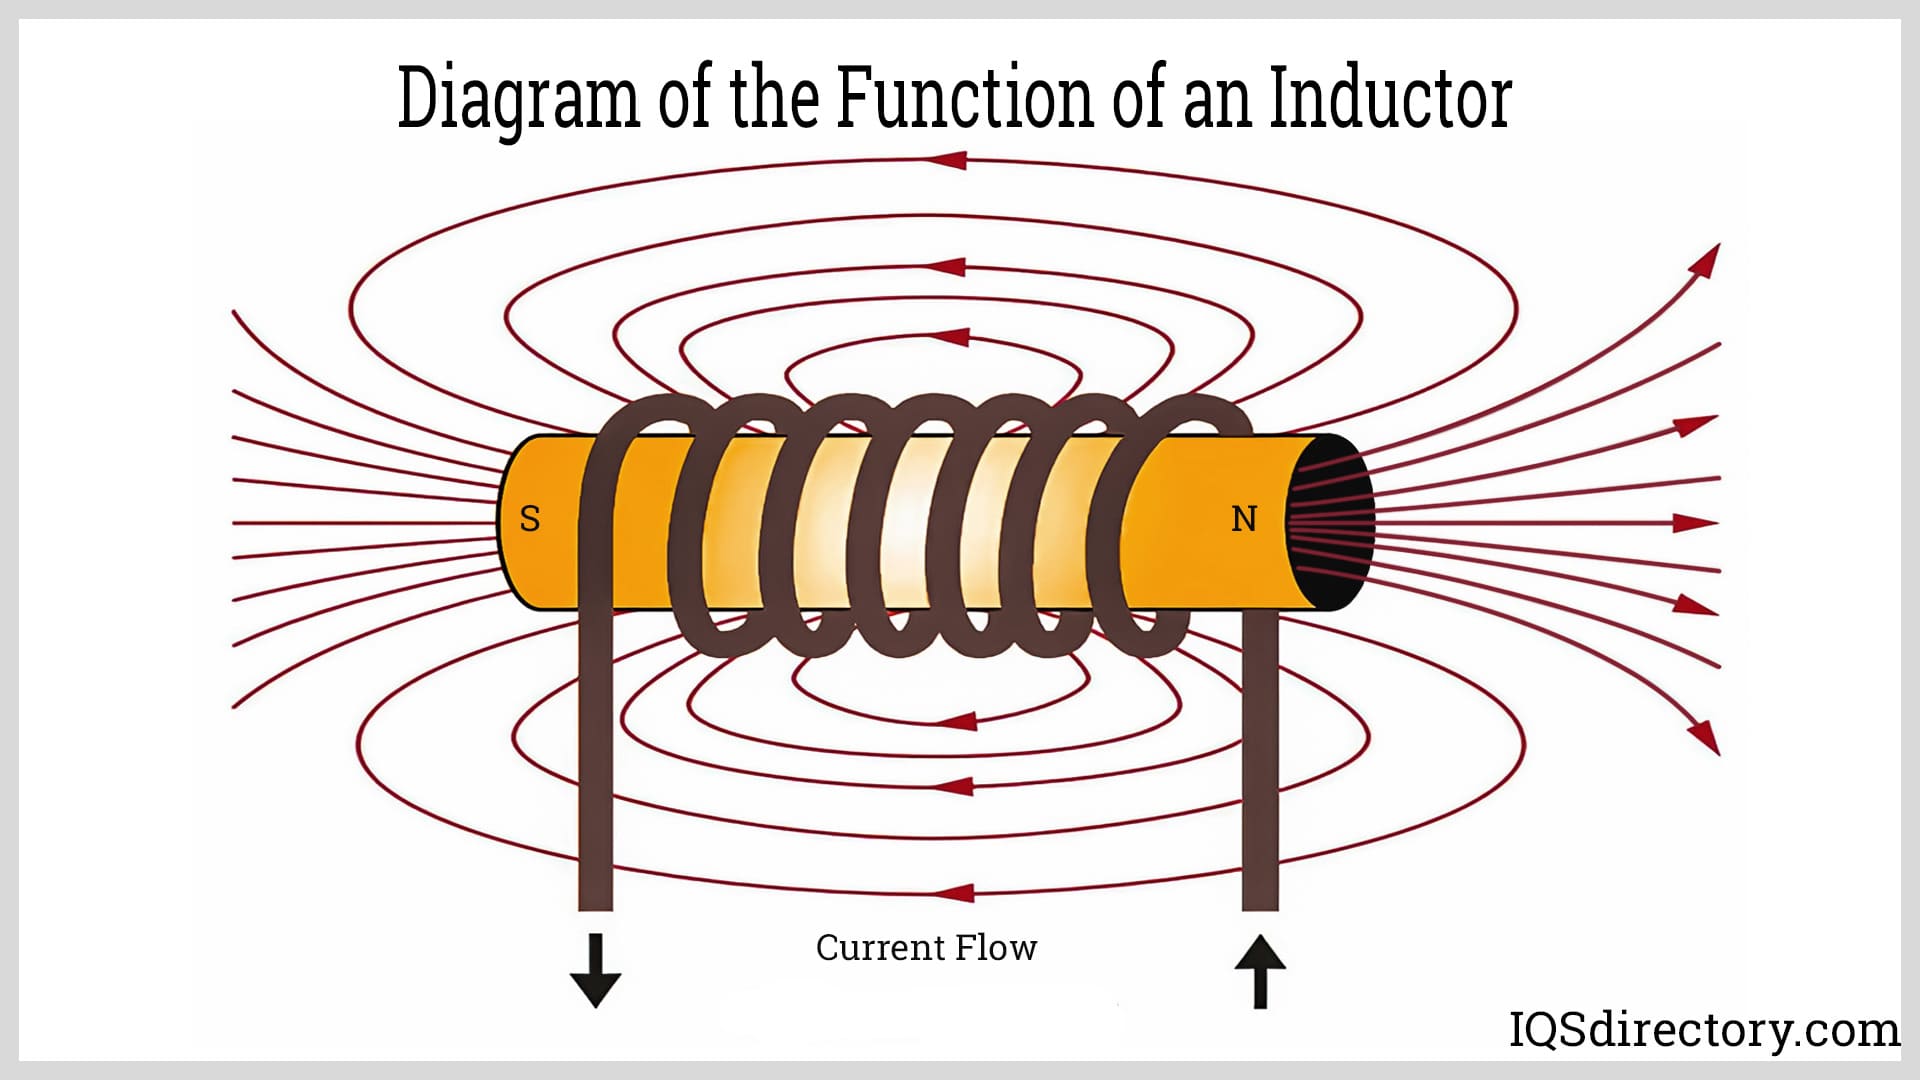 Diagram of the Function of an Inductor